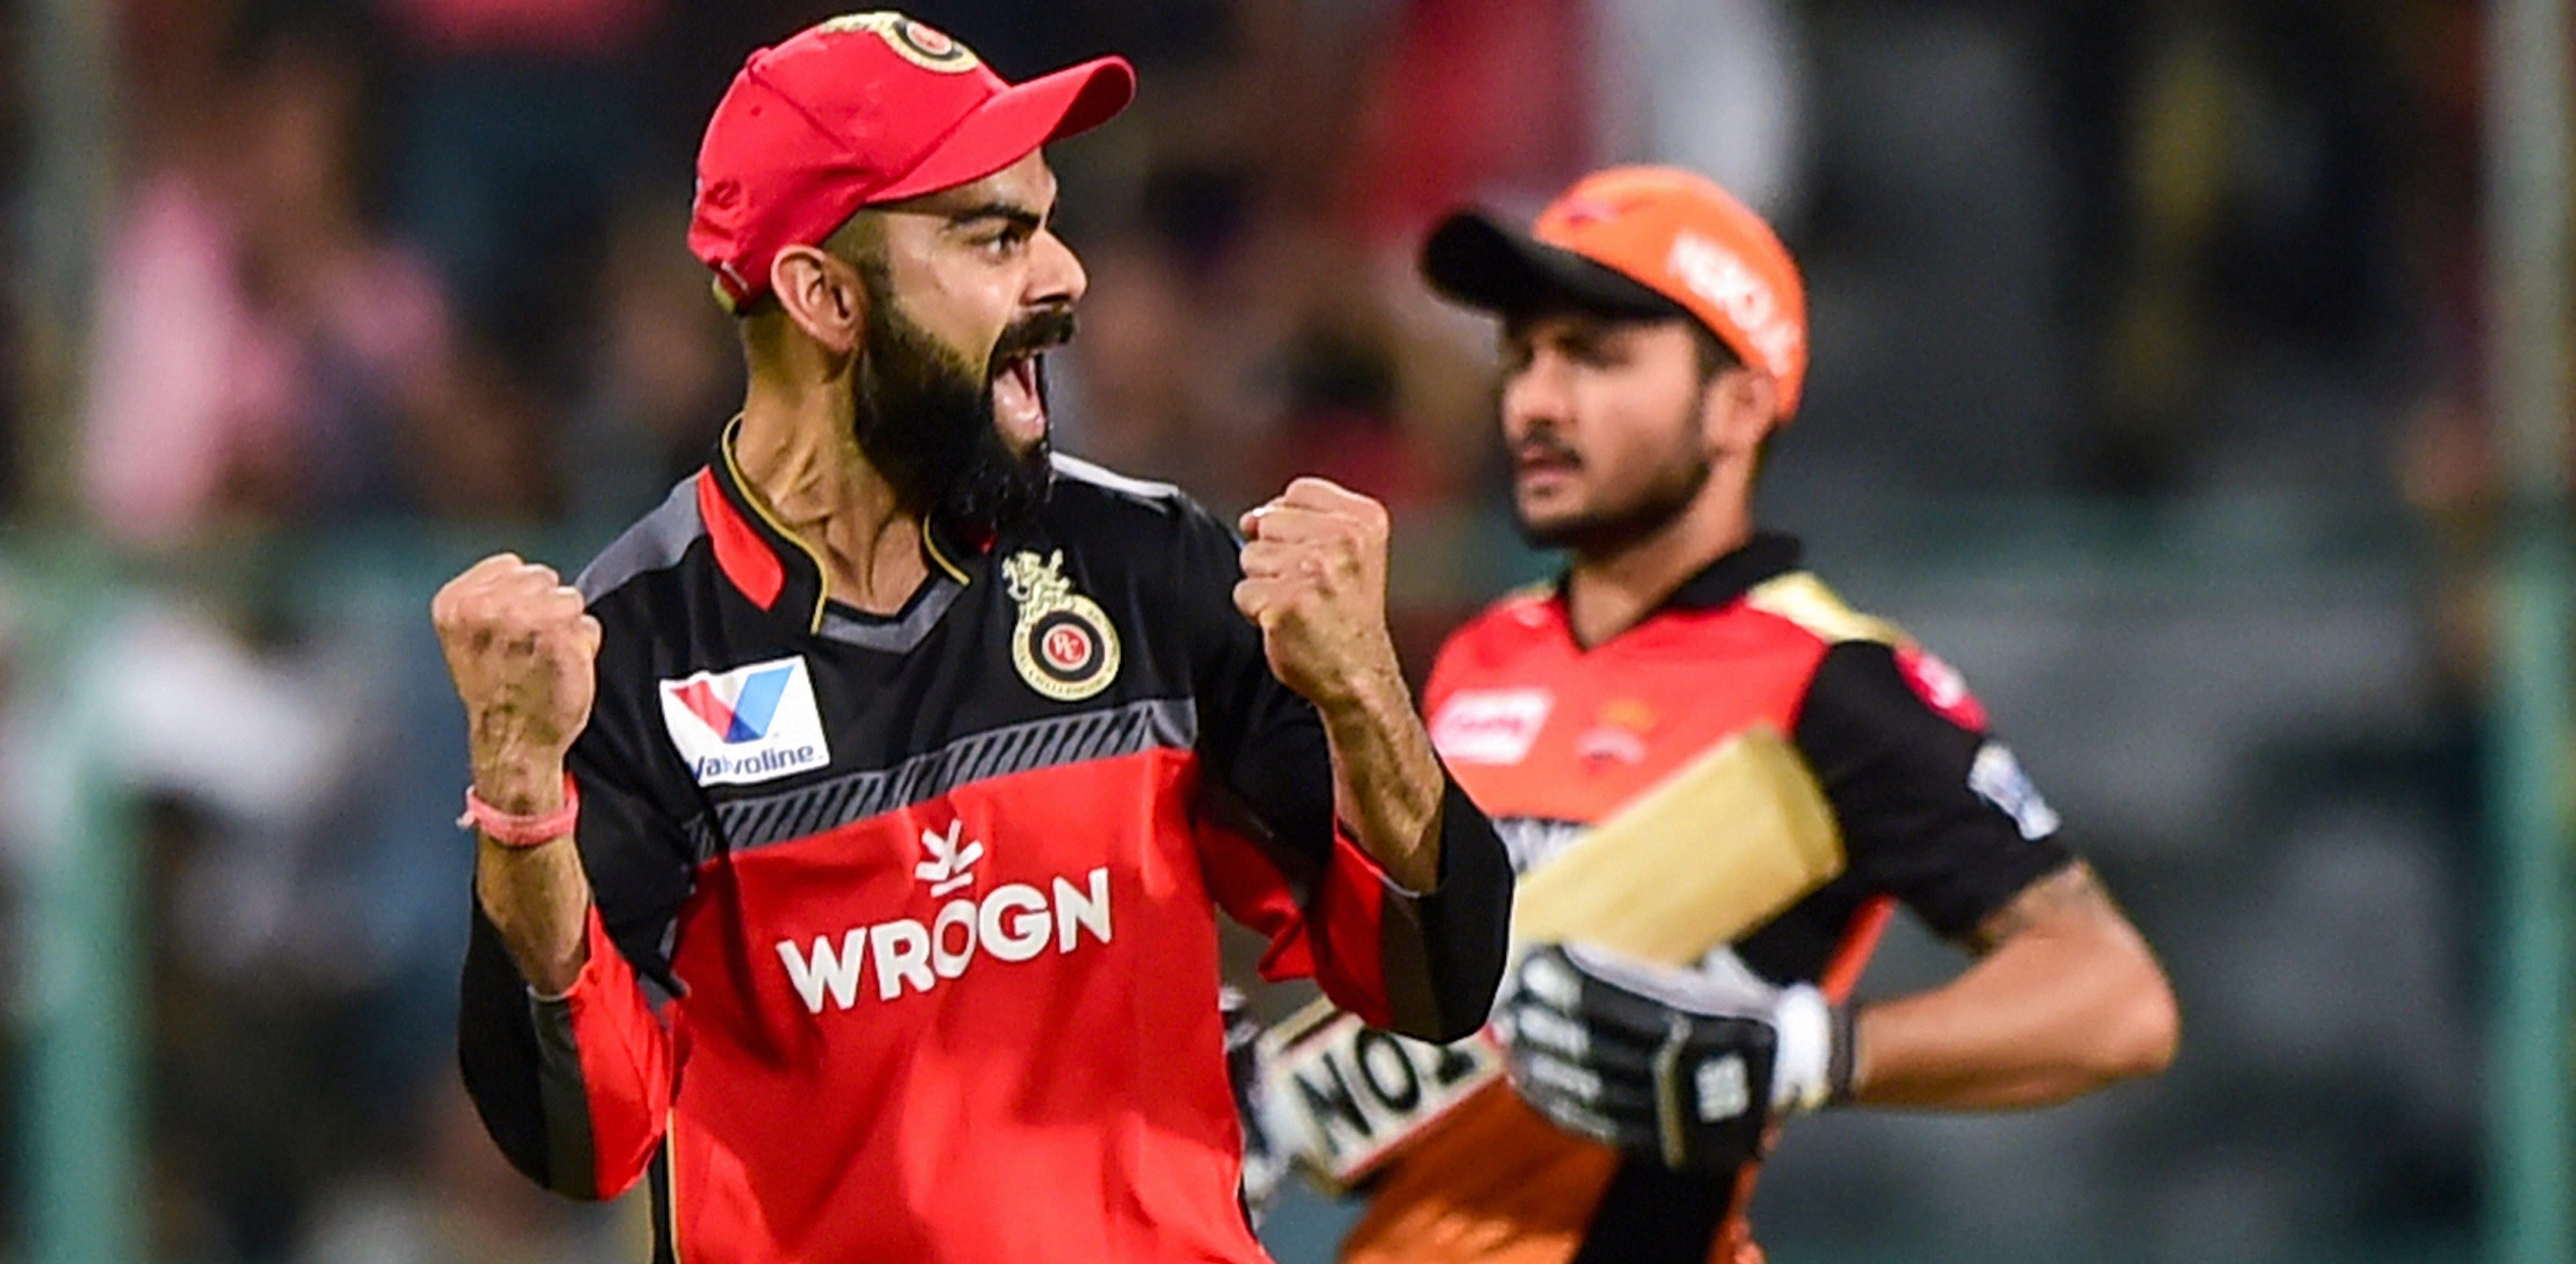 RCB are over-reliant on Virat Kohli and de Villiers to deliver in every match every single season. If those two don’t get going, then RCB’s campaign will fizzle out early yet again. Credit: PTI